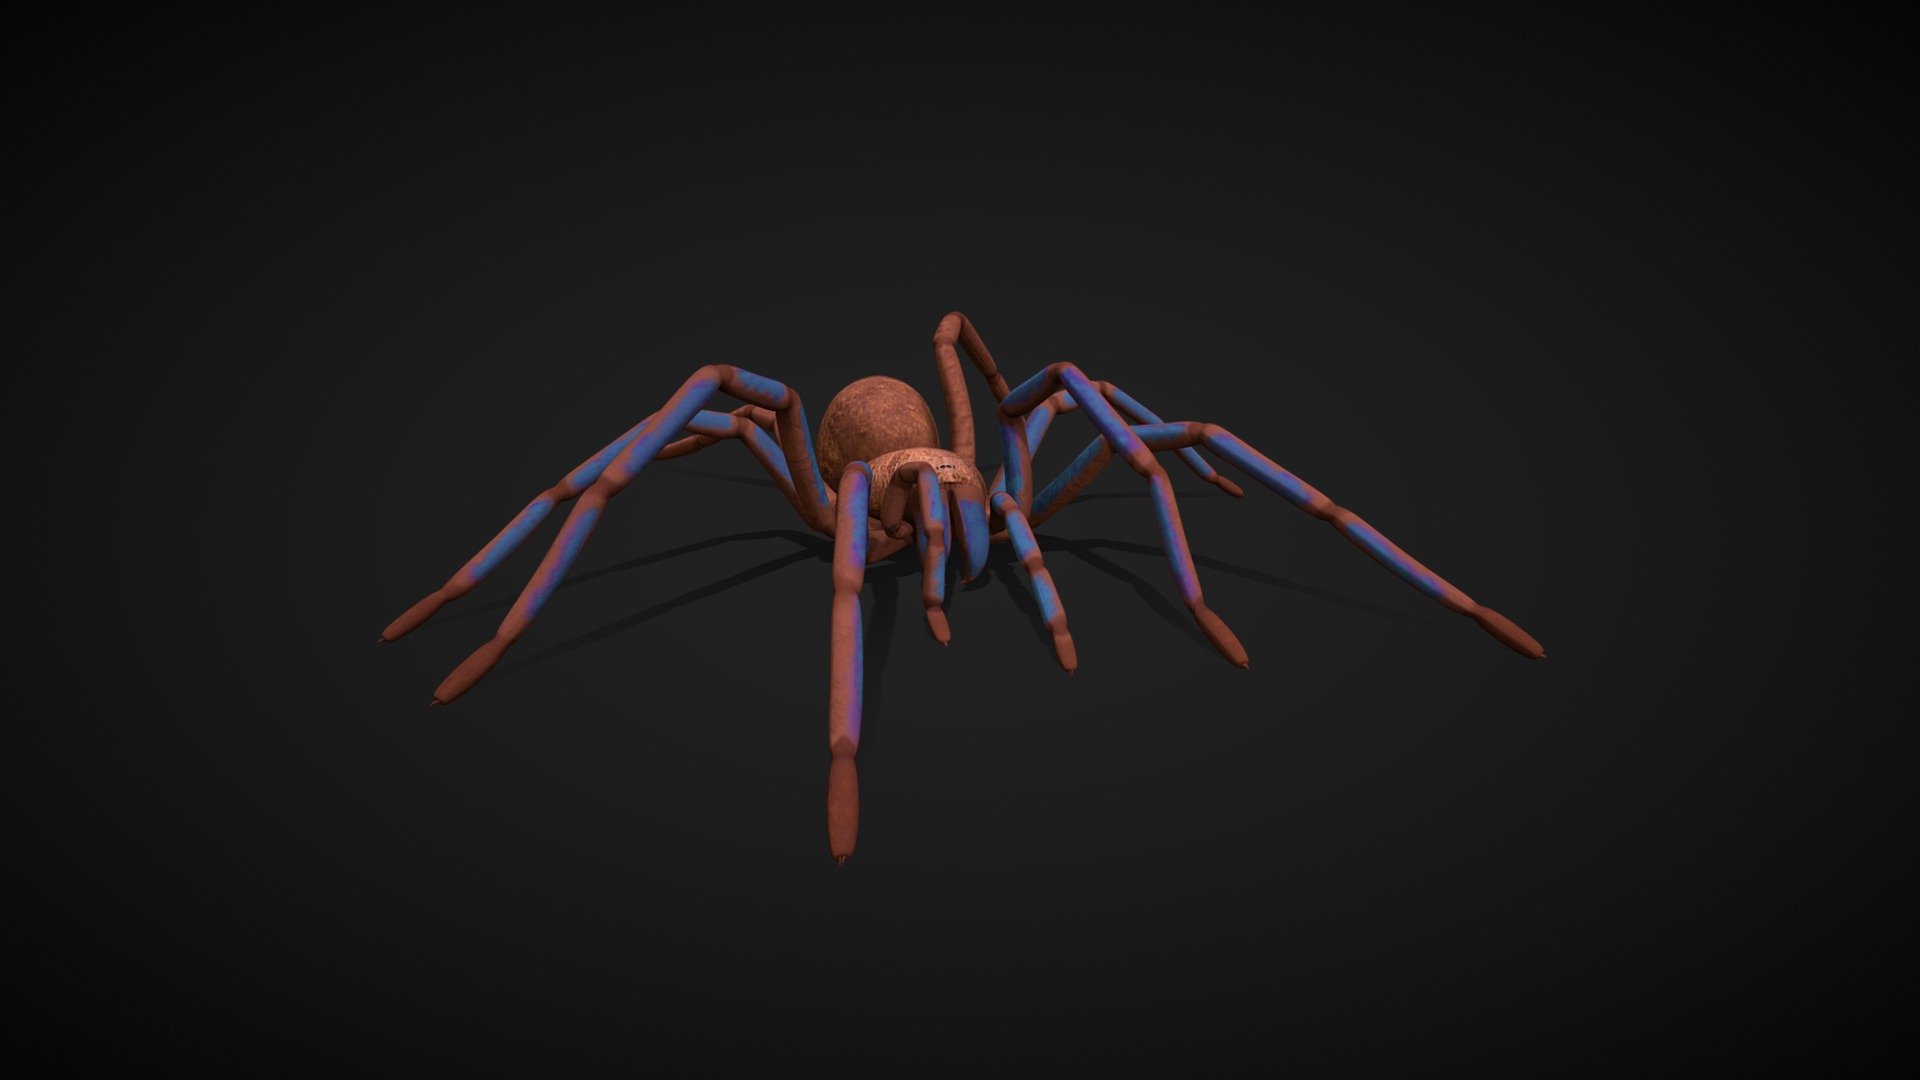 Model of Tarantula Chilobrachys sp. electric blue Rigged &amp; animated with walk cycles.
Made in Blender 3.4

[NOTE]: .blend file with FUR EDITION attached in additional files.

-&gt; Full article with BONUS stuff on: https://www.behance.net/gallery/166731955/3D-Animated-Model-of-Chilobrachys-sp-Electric-blue - Spider Tarantula walk cycle game ready - Buy Royalty Free 3D model by PAVS (@pavs3d) 3d model